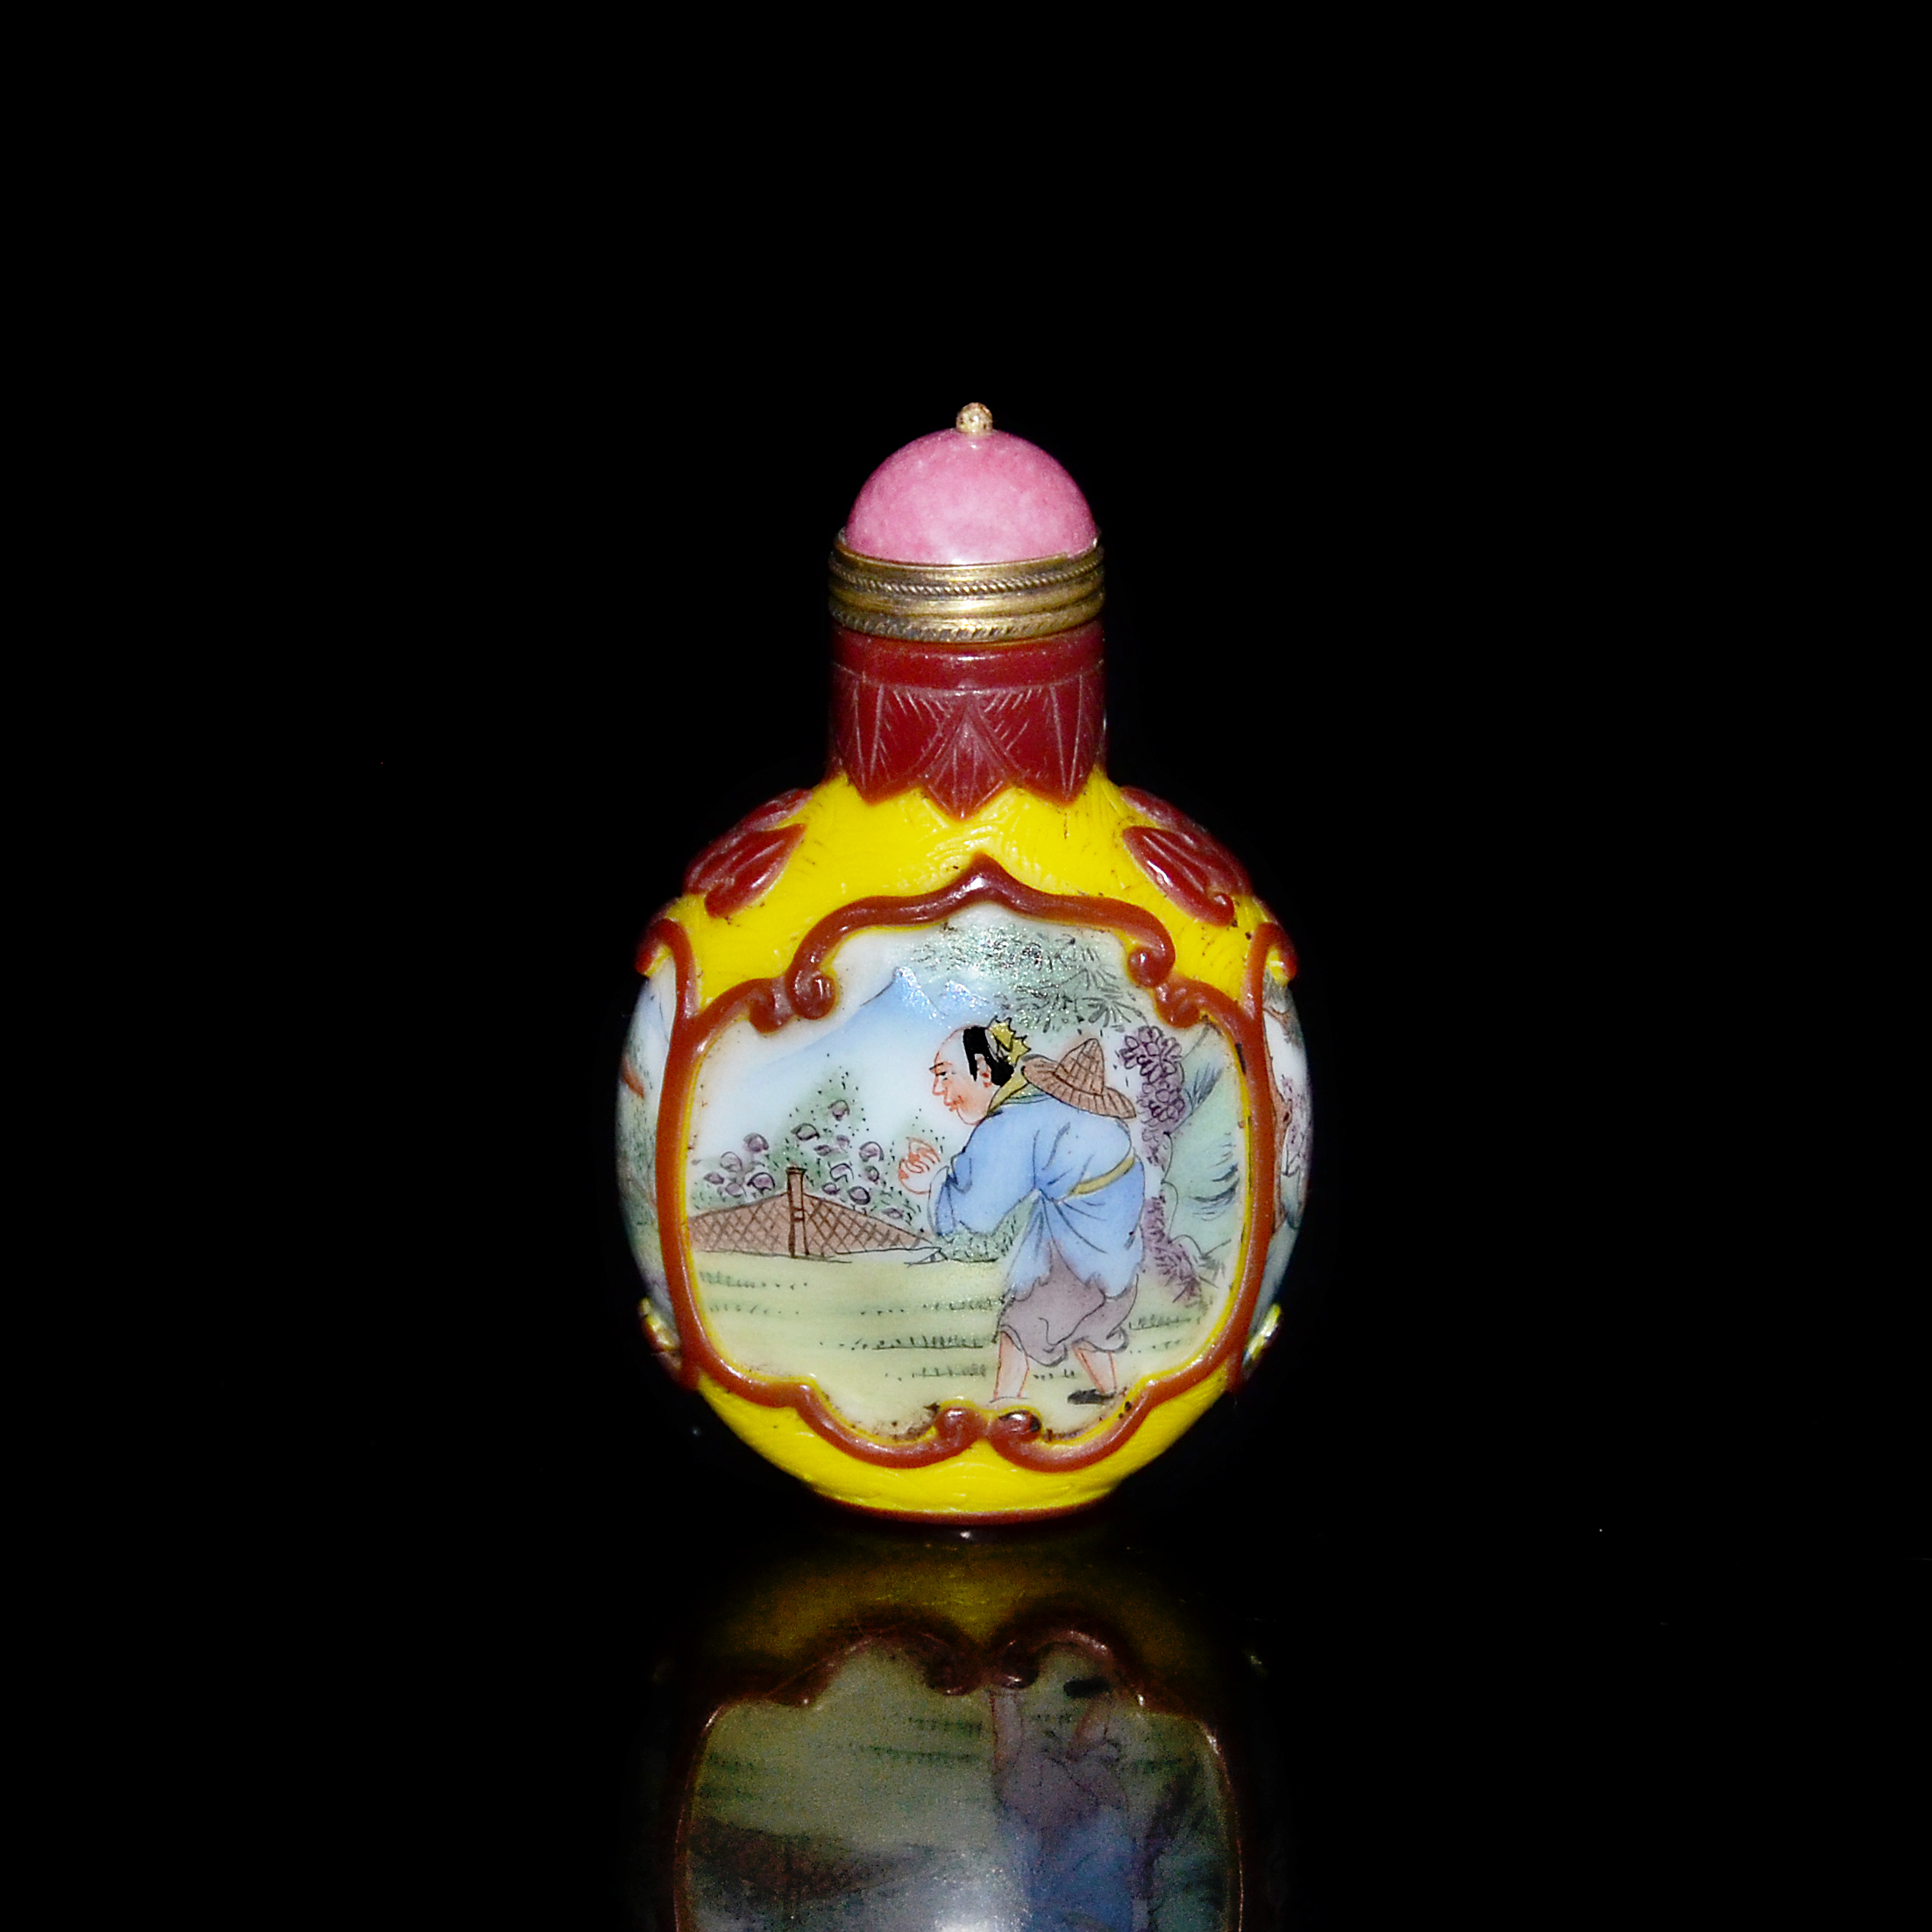 Qianlong period Famille Rose snuff bottle with red glass overlay creating windows of bird and floral decoration, with four-character Qianlong mark. $2,000 - $4,000